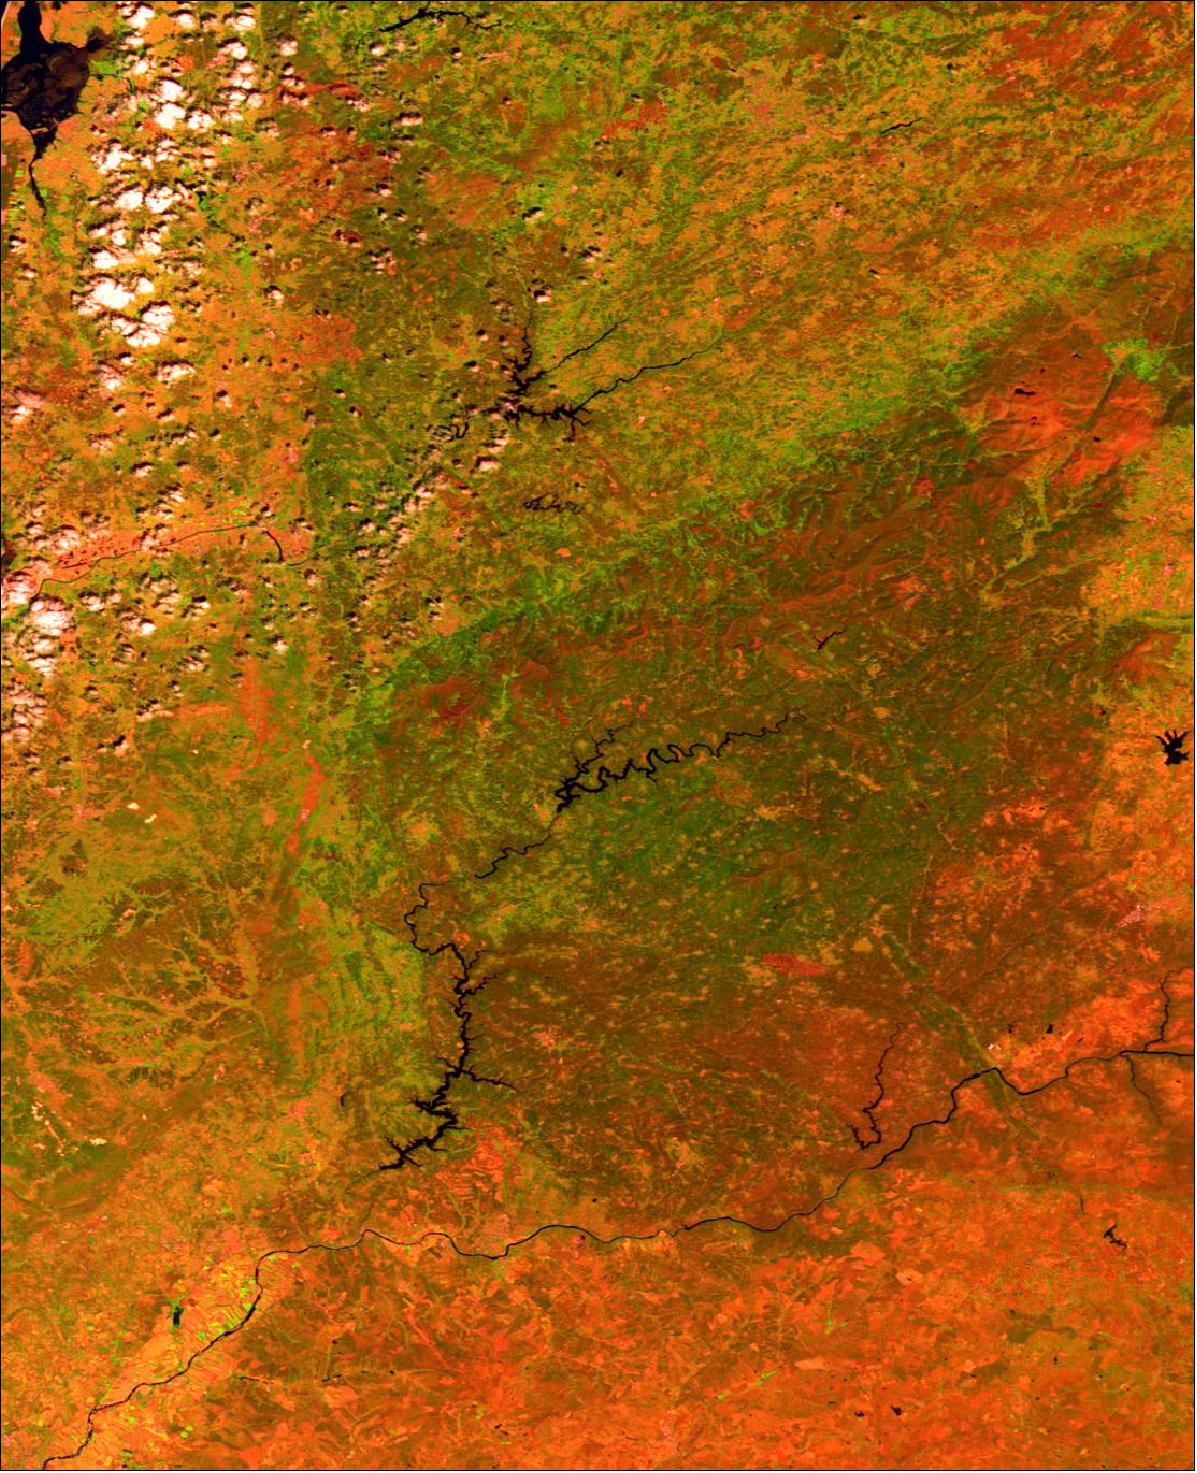 Figure 39: Before the blaze: Portugal's Pedrógão Grande region. This 100 m-resolution image was acquired on 19 May 2017 by PROBA-V, showing the region before the forest fire that started on 17 June (image credit: ESA/BELSPO produced by VITO)